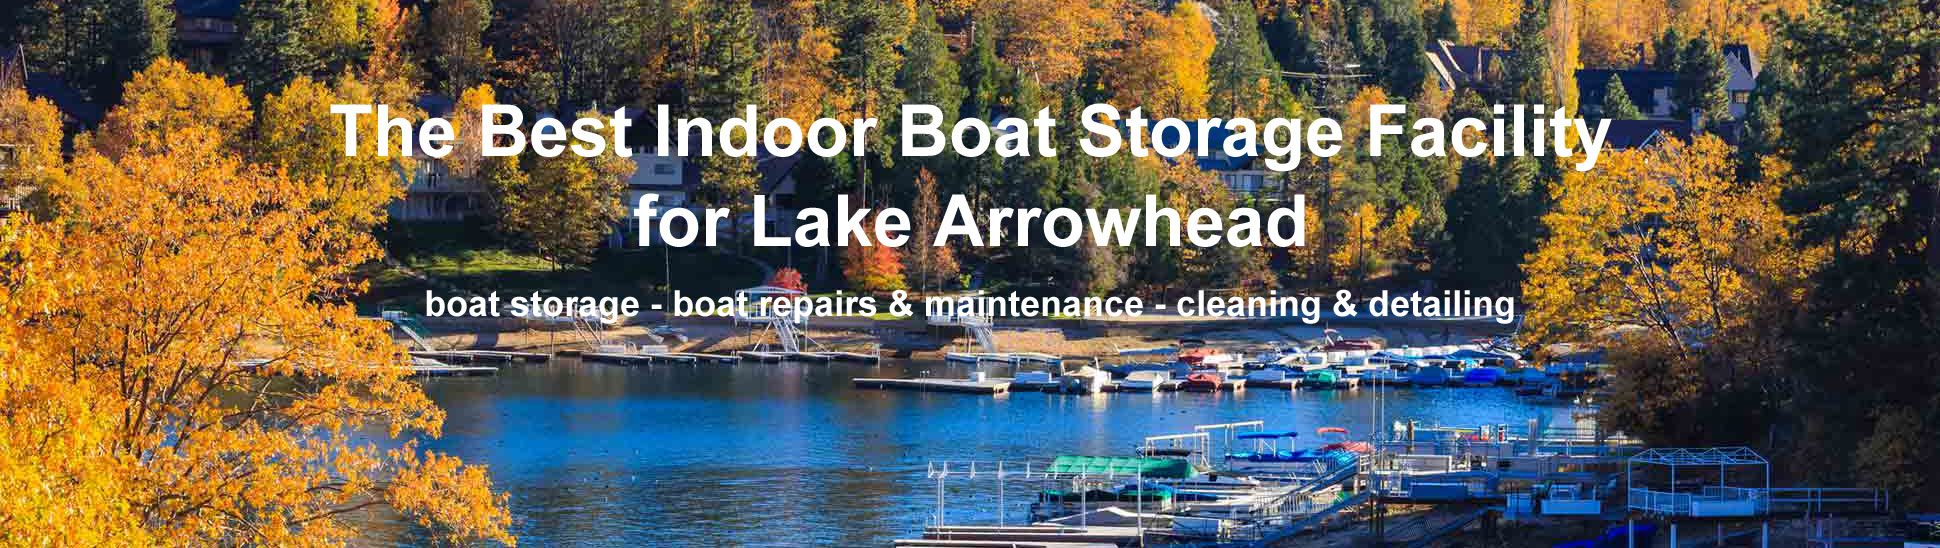 The Largest Indoor Boat Storage Facility in the Area